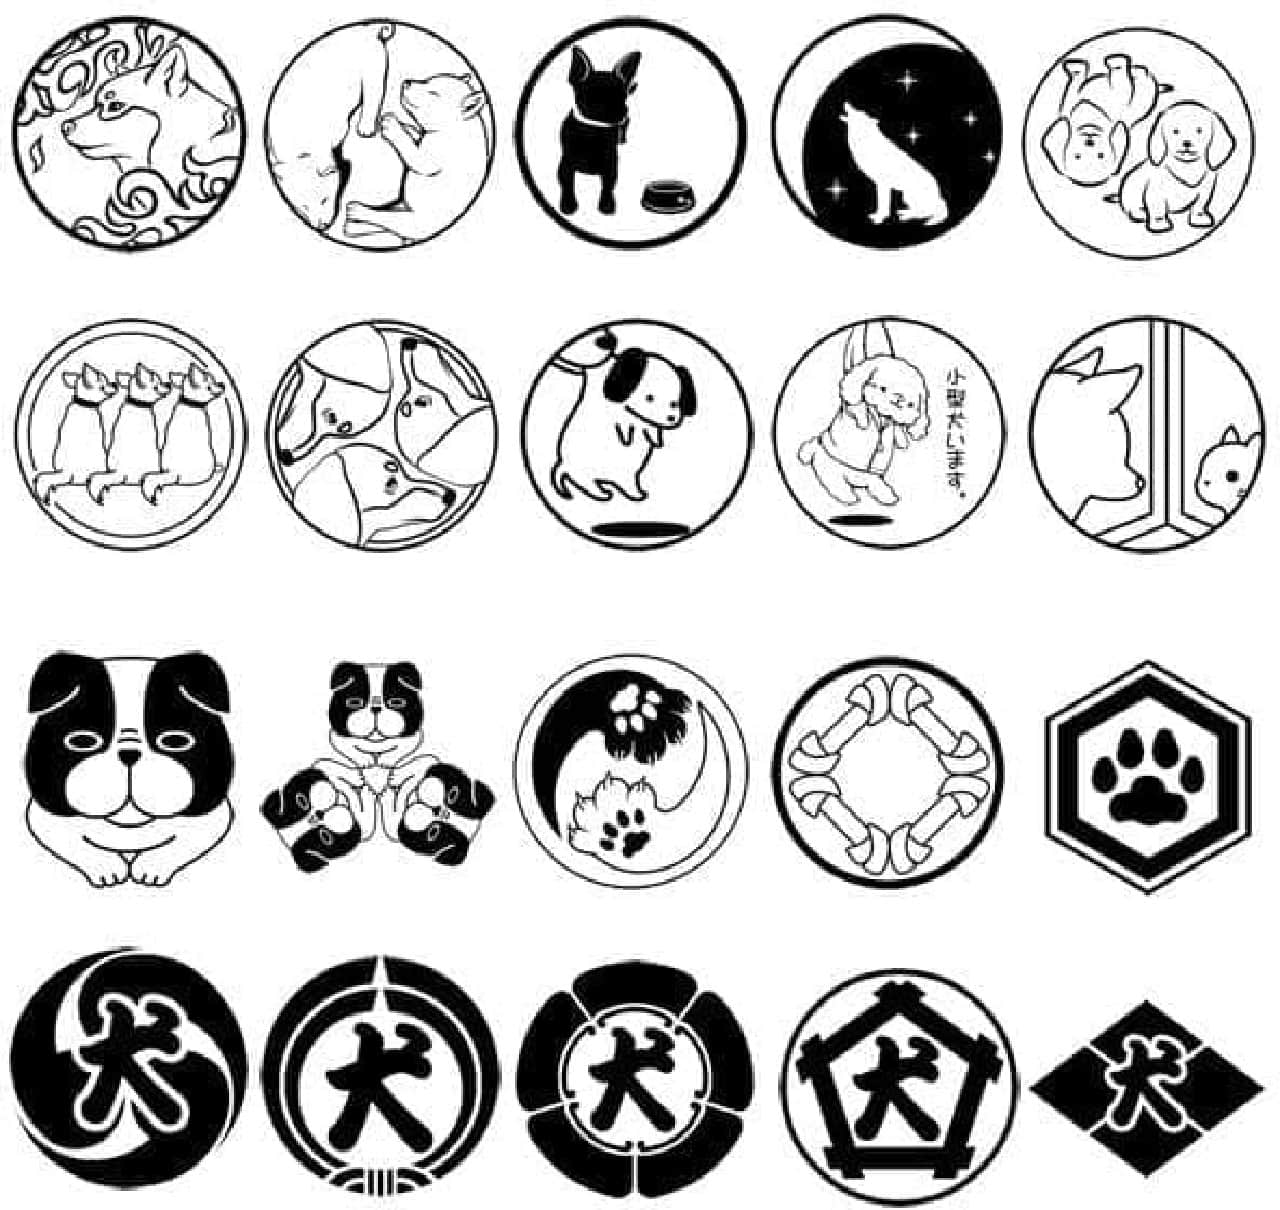 Dog illustrations and "dog family crests" of "Inumon nameplate" that can be selected from 20 types